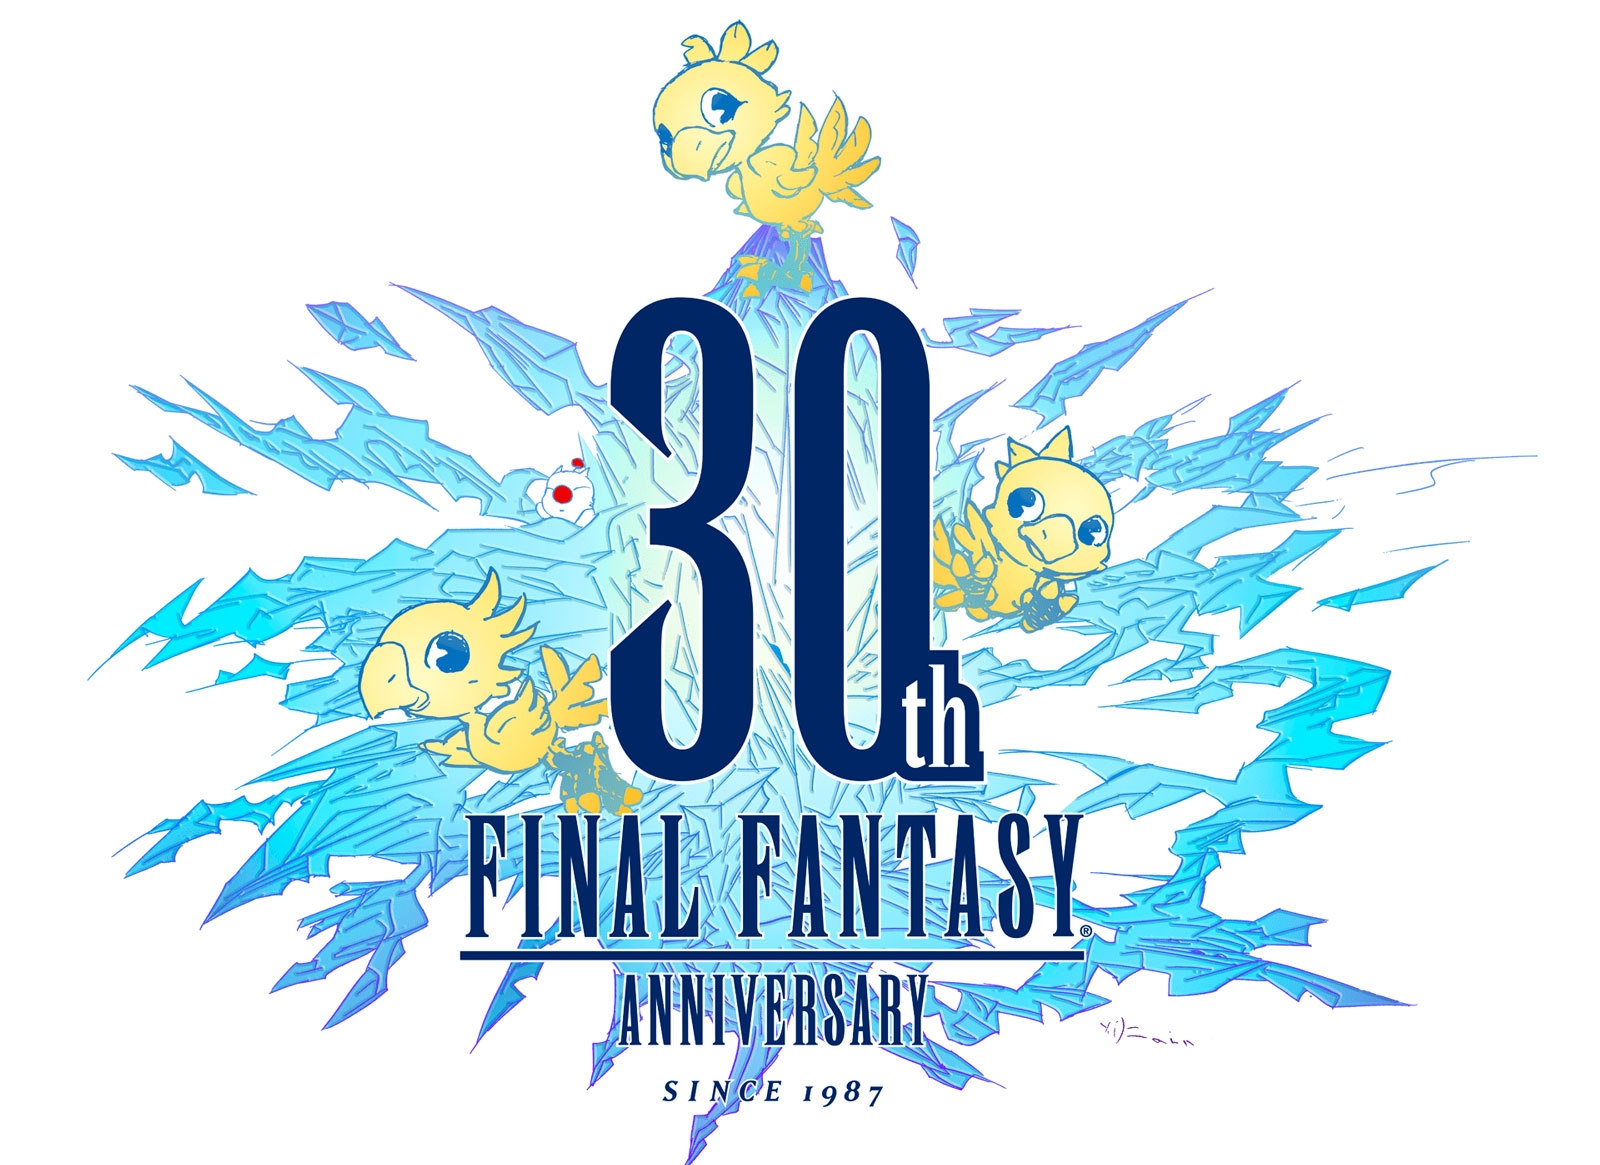 'Final Fantasy' celebrates 30 years of not being very final | DeviceDaily.com